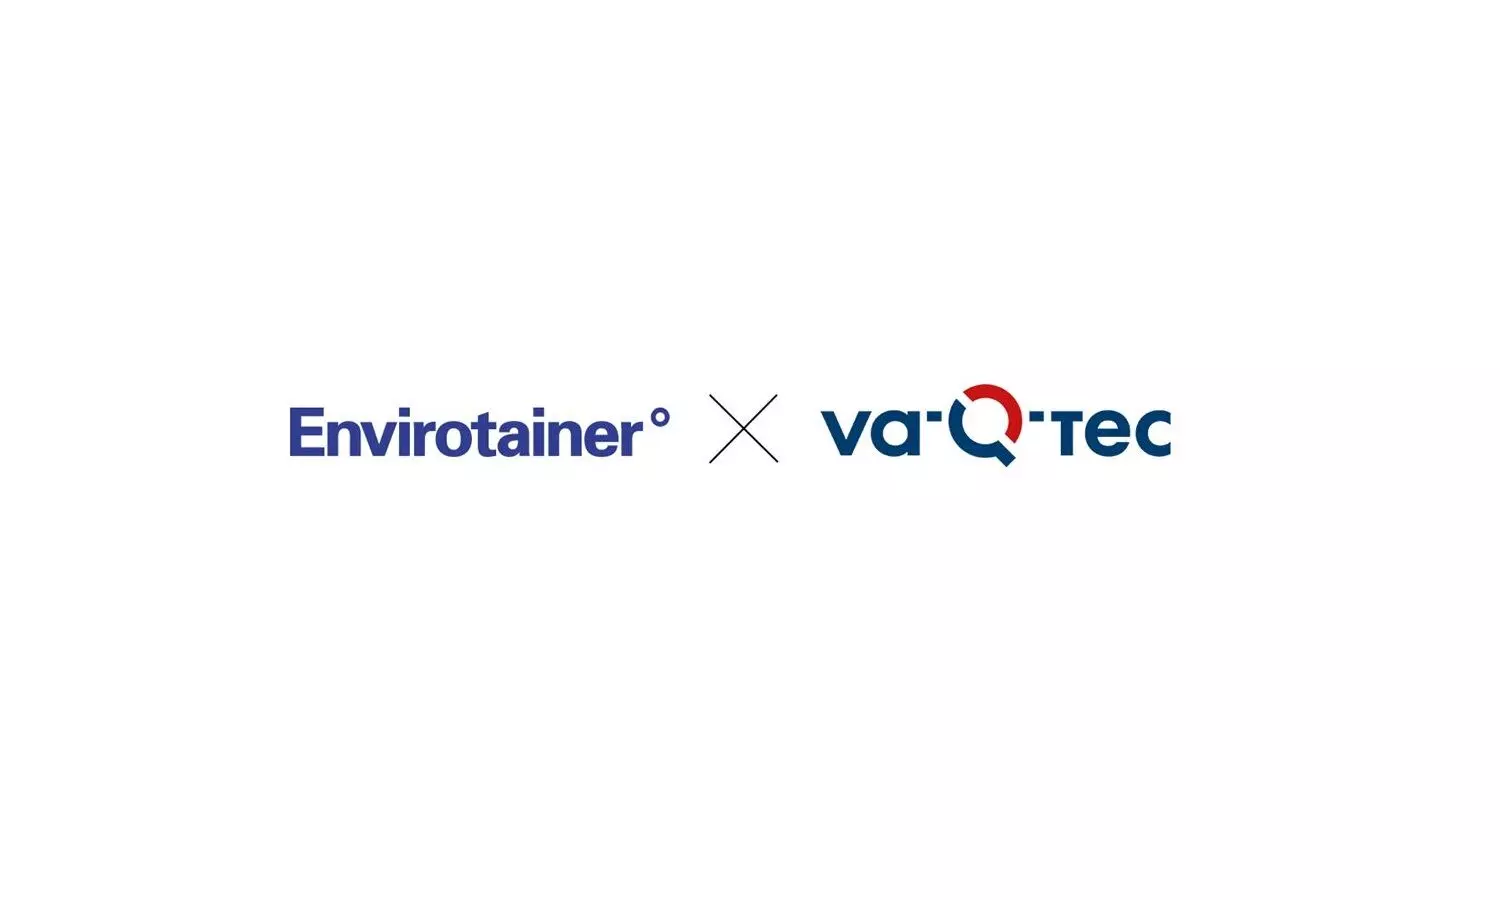 Envirotainer and va-Q-tec to become combined pharma ULD business